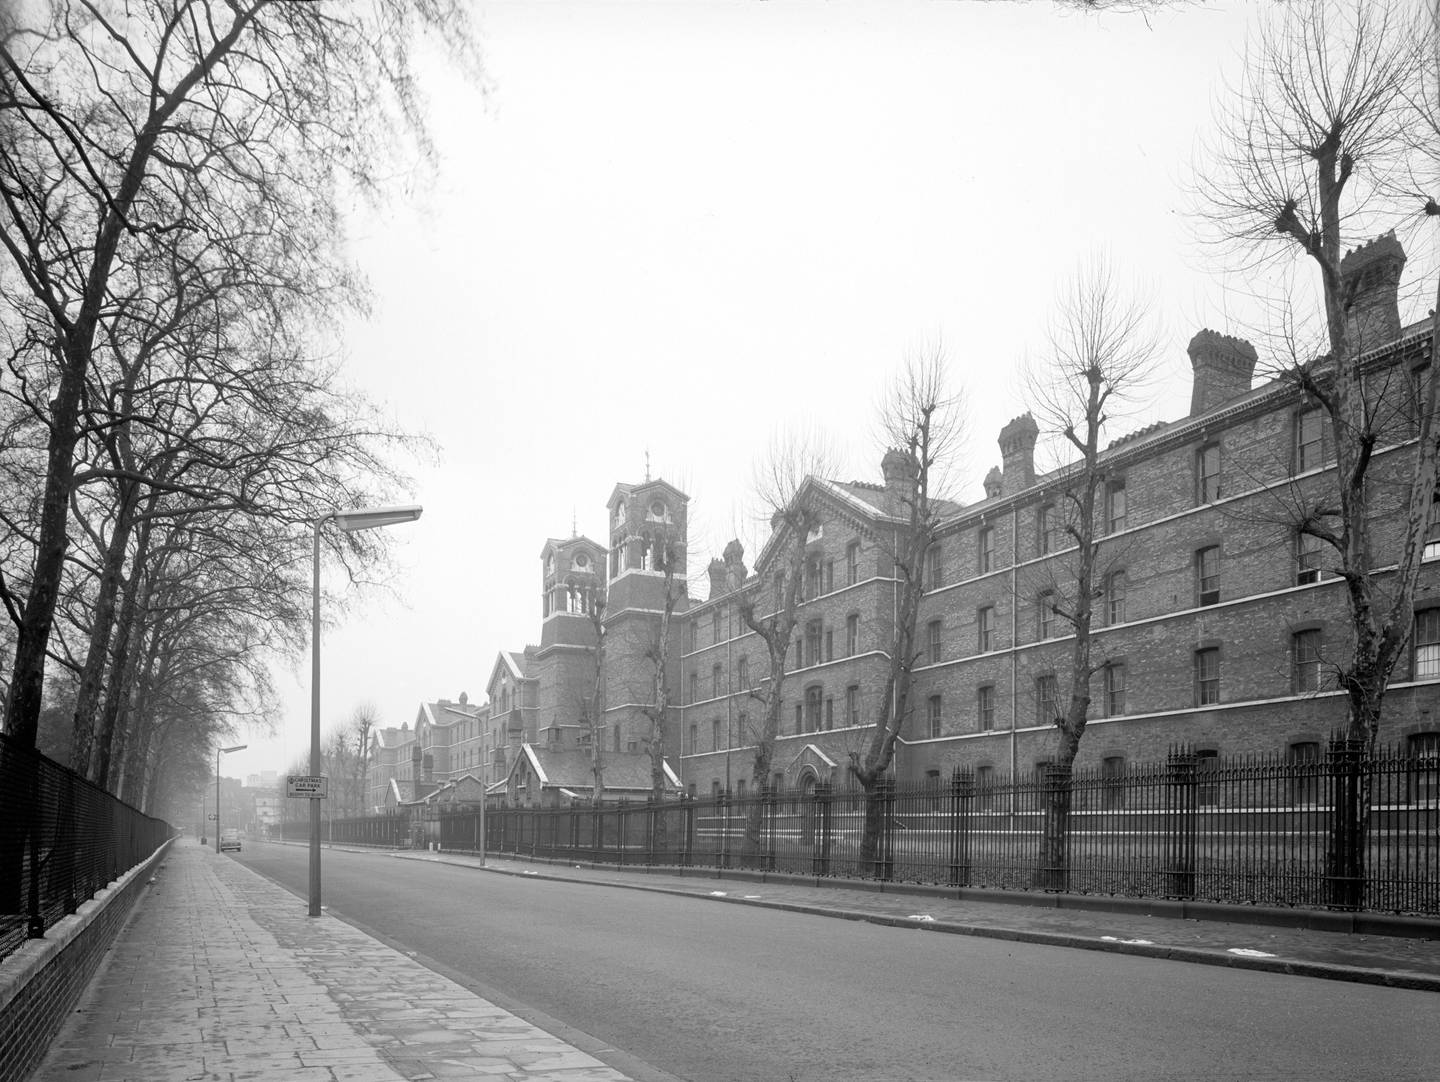 Chelsea Barracks was army barracks in the City of Westminster. Alamy